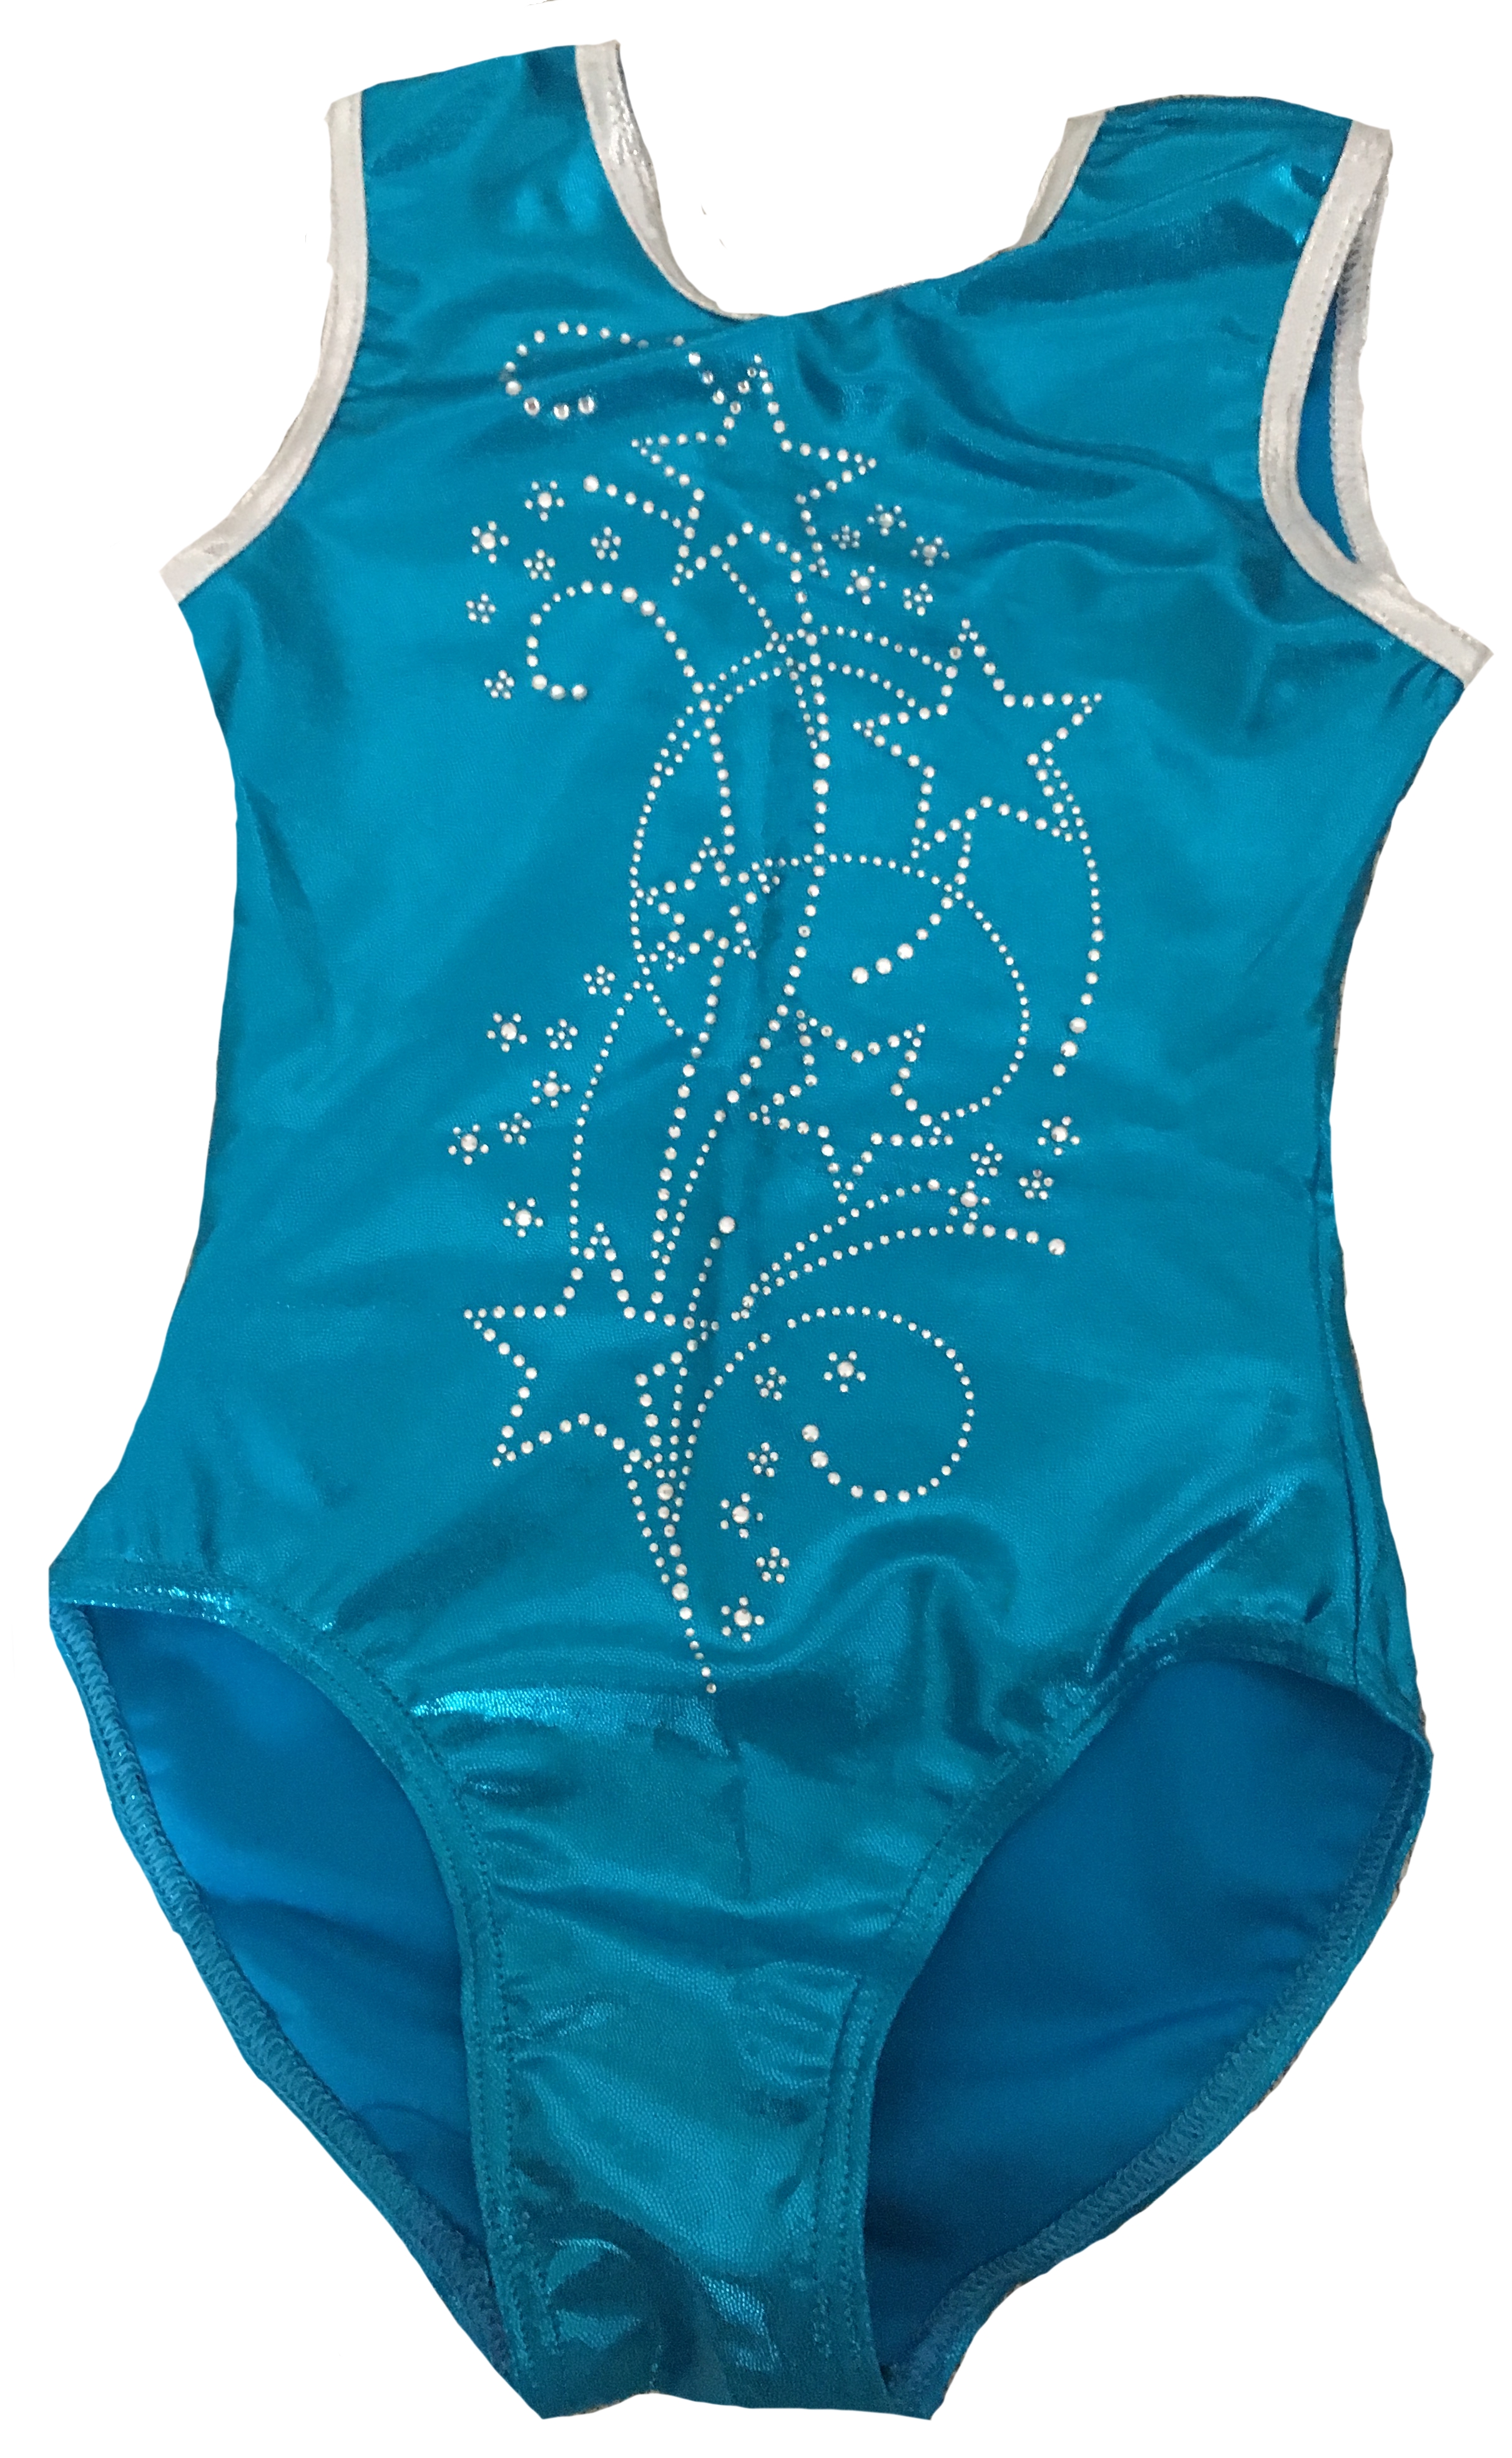 Training Leotard (Limited stock as old design)